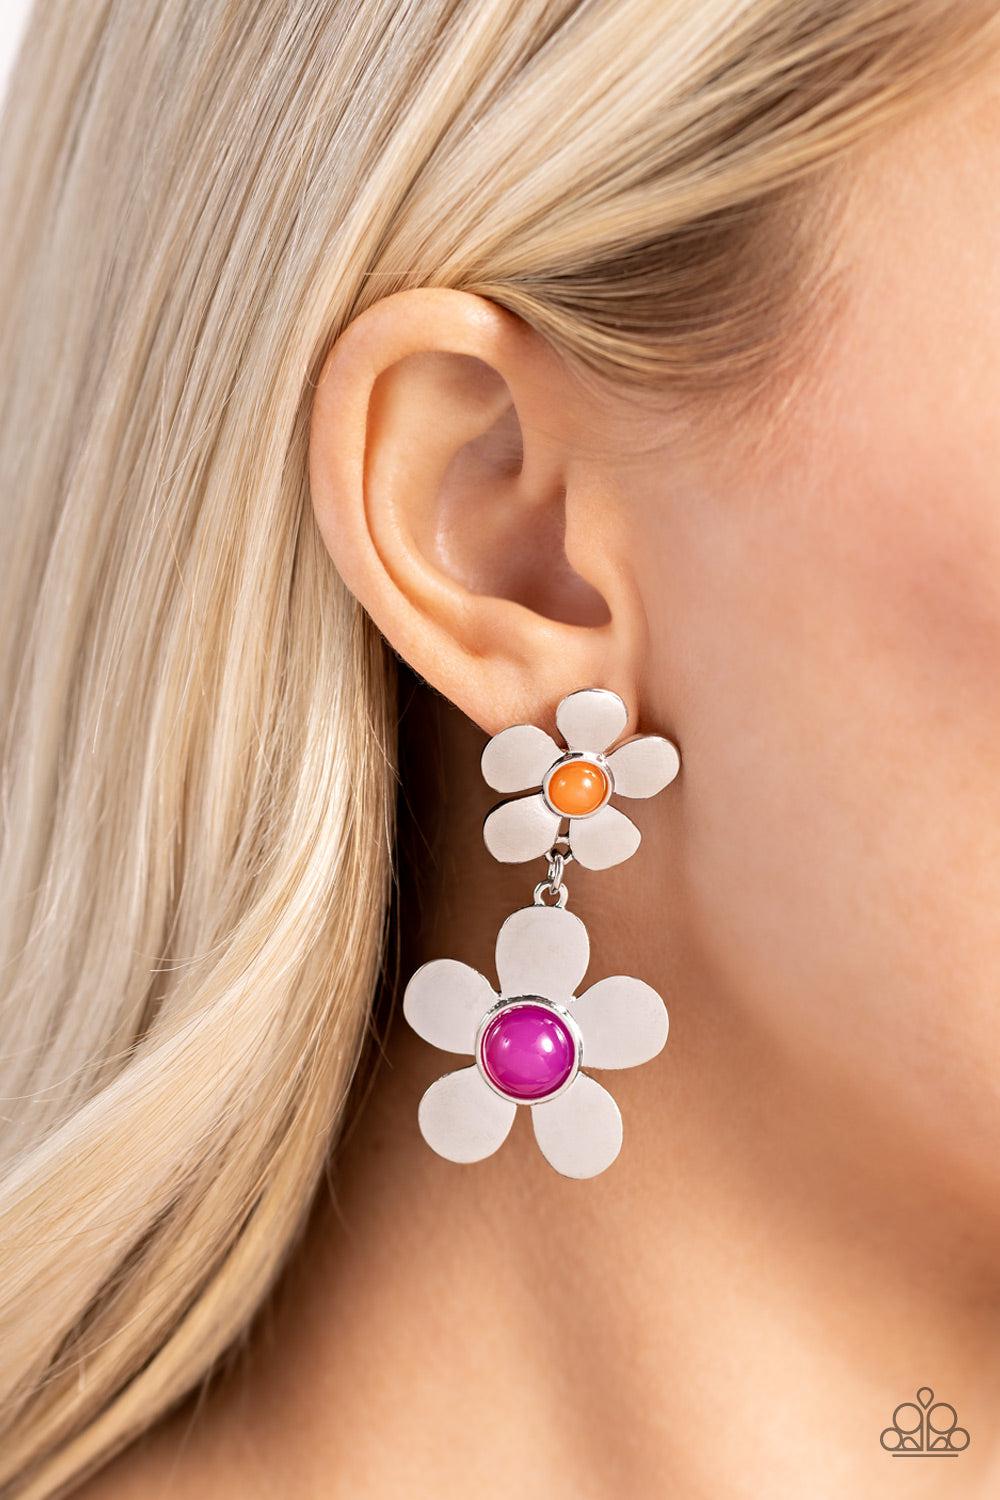 Fashionable Florals Pink & Silver Flower Earrings - Paparazzi Accessories- lightbox - CarasShop.com - $5 Jewelry by Cara Jewels